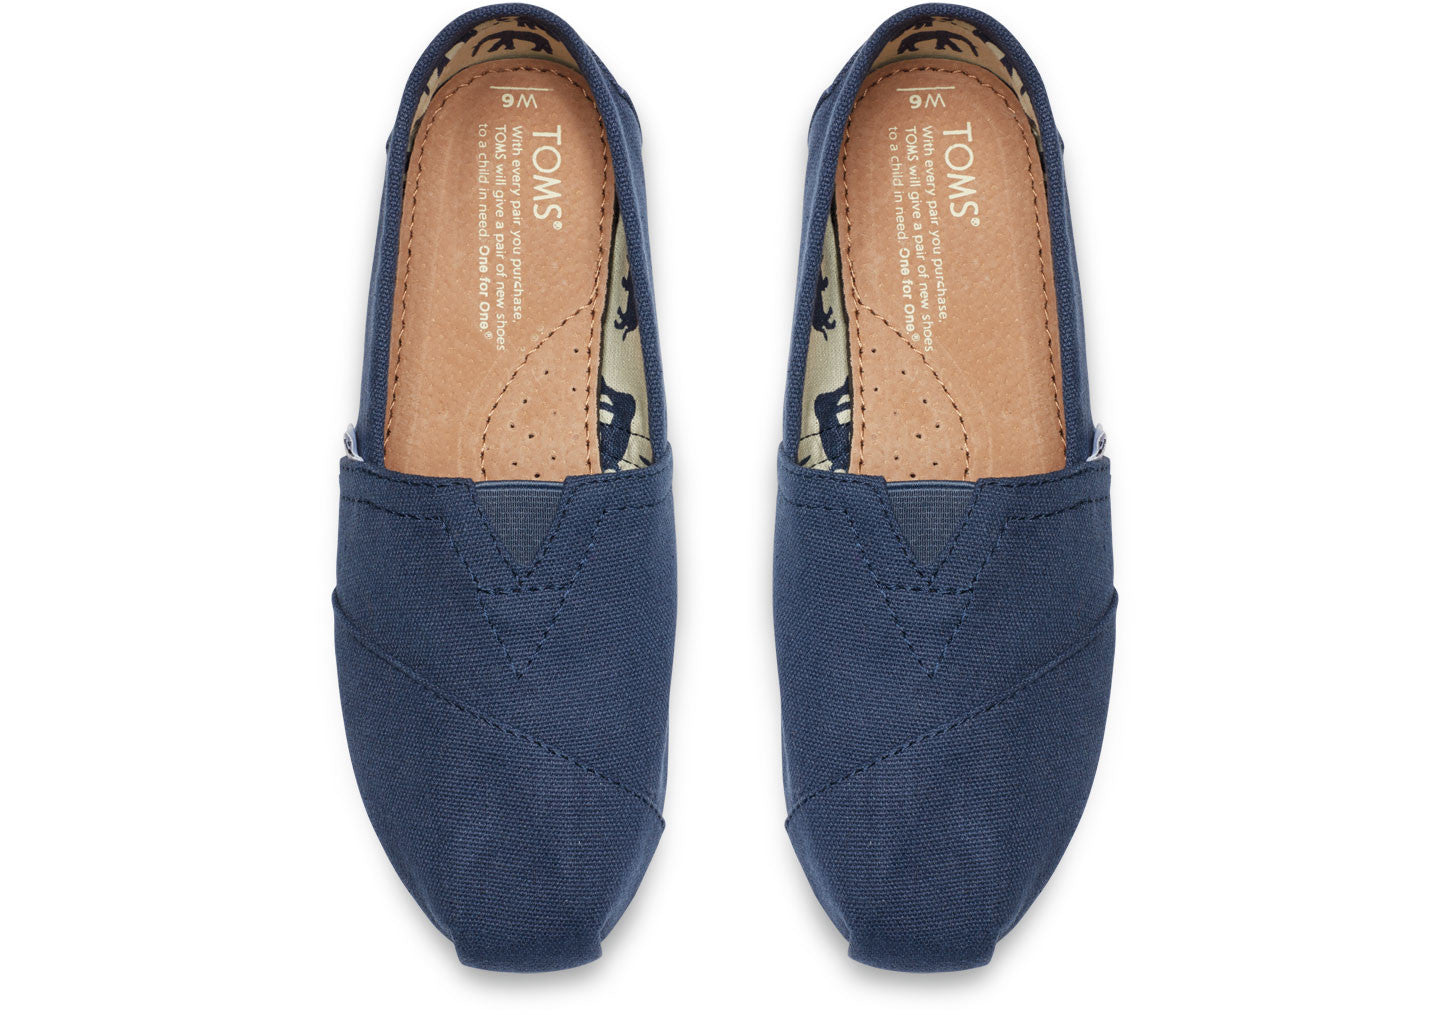 toms classic navy canvas